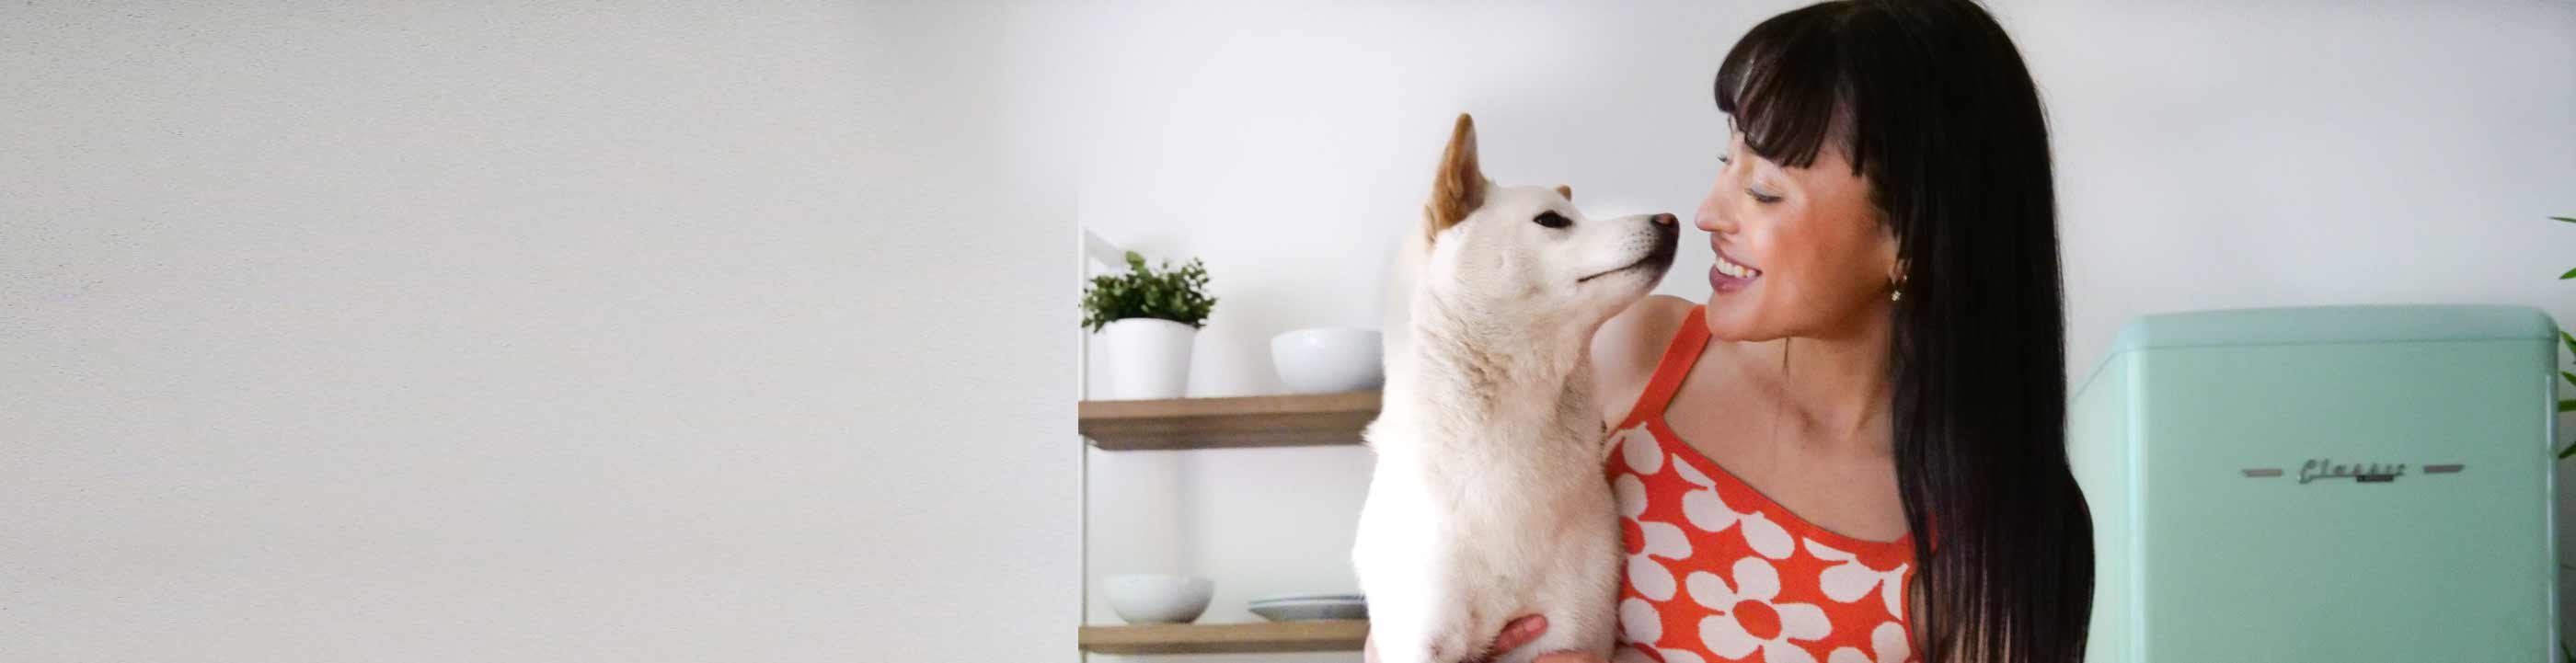 woman and her fresh pup looking lovingly at each other with oxyfresh pet water additive and a water bowl on the counter in front of them